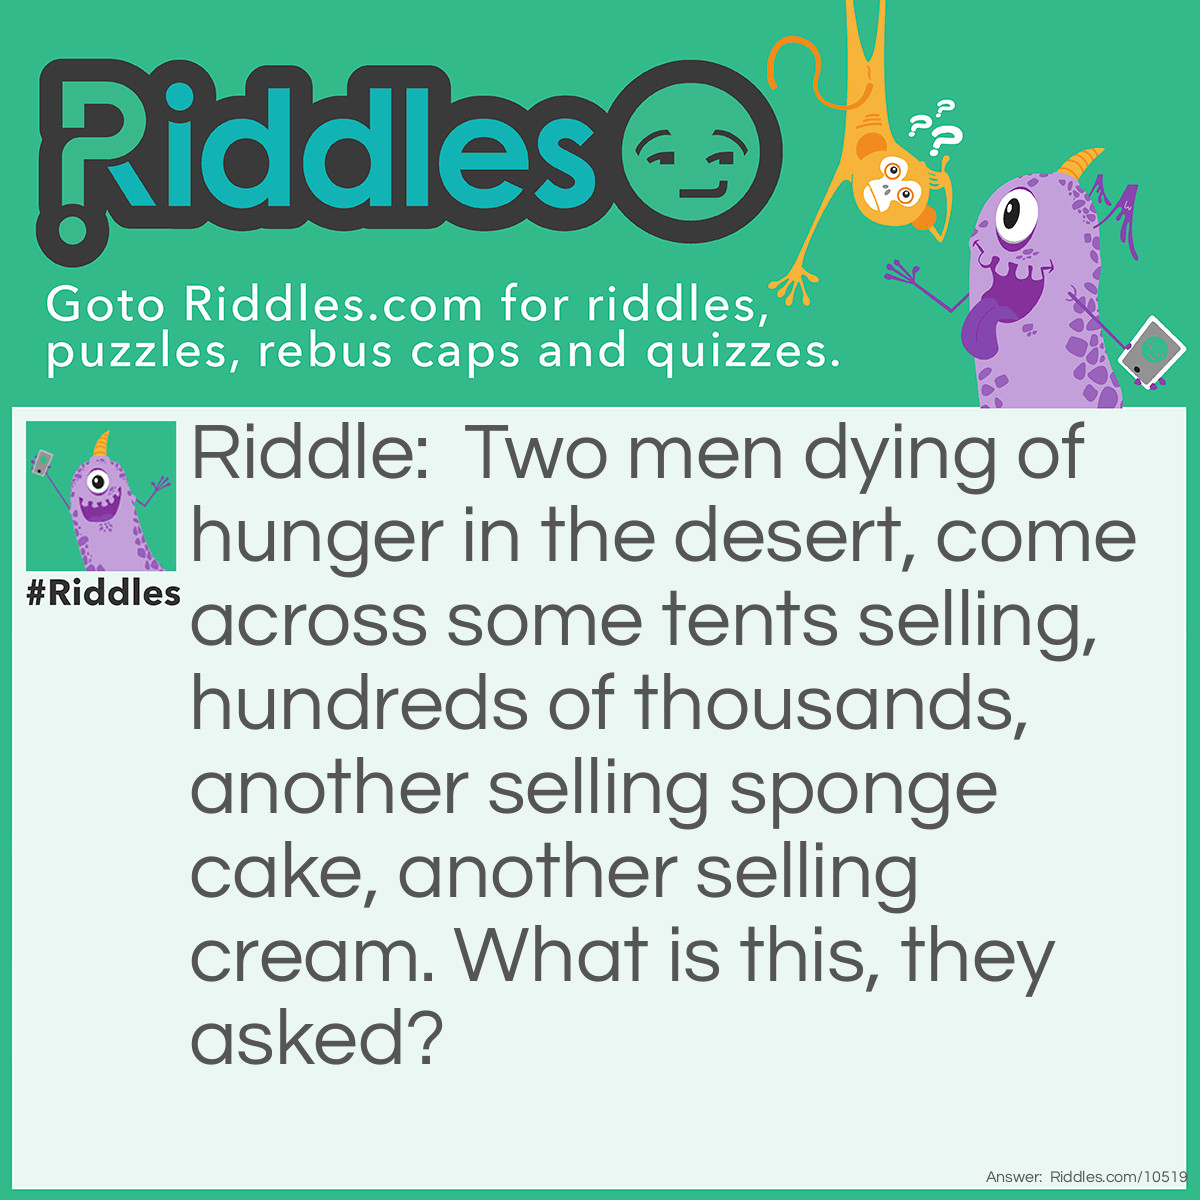 Riddle: Two men dying of hunger in the desert, come across some tents selling, hundreds of thousands, another selling sponge cake, another selling cream. What is this, they asked? Answer: It is a trifle bazaar, that is for Sue.